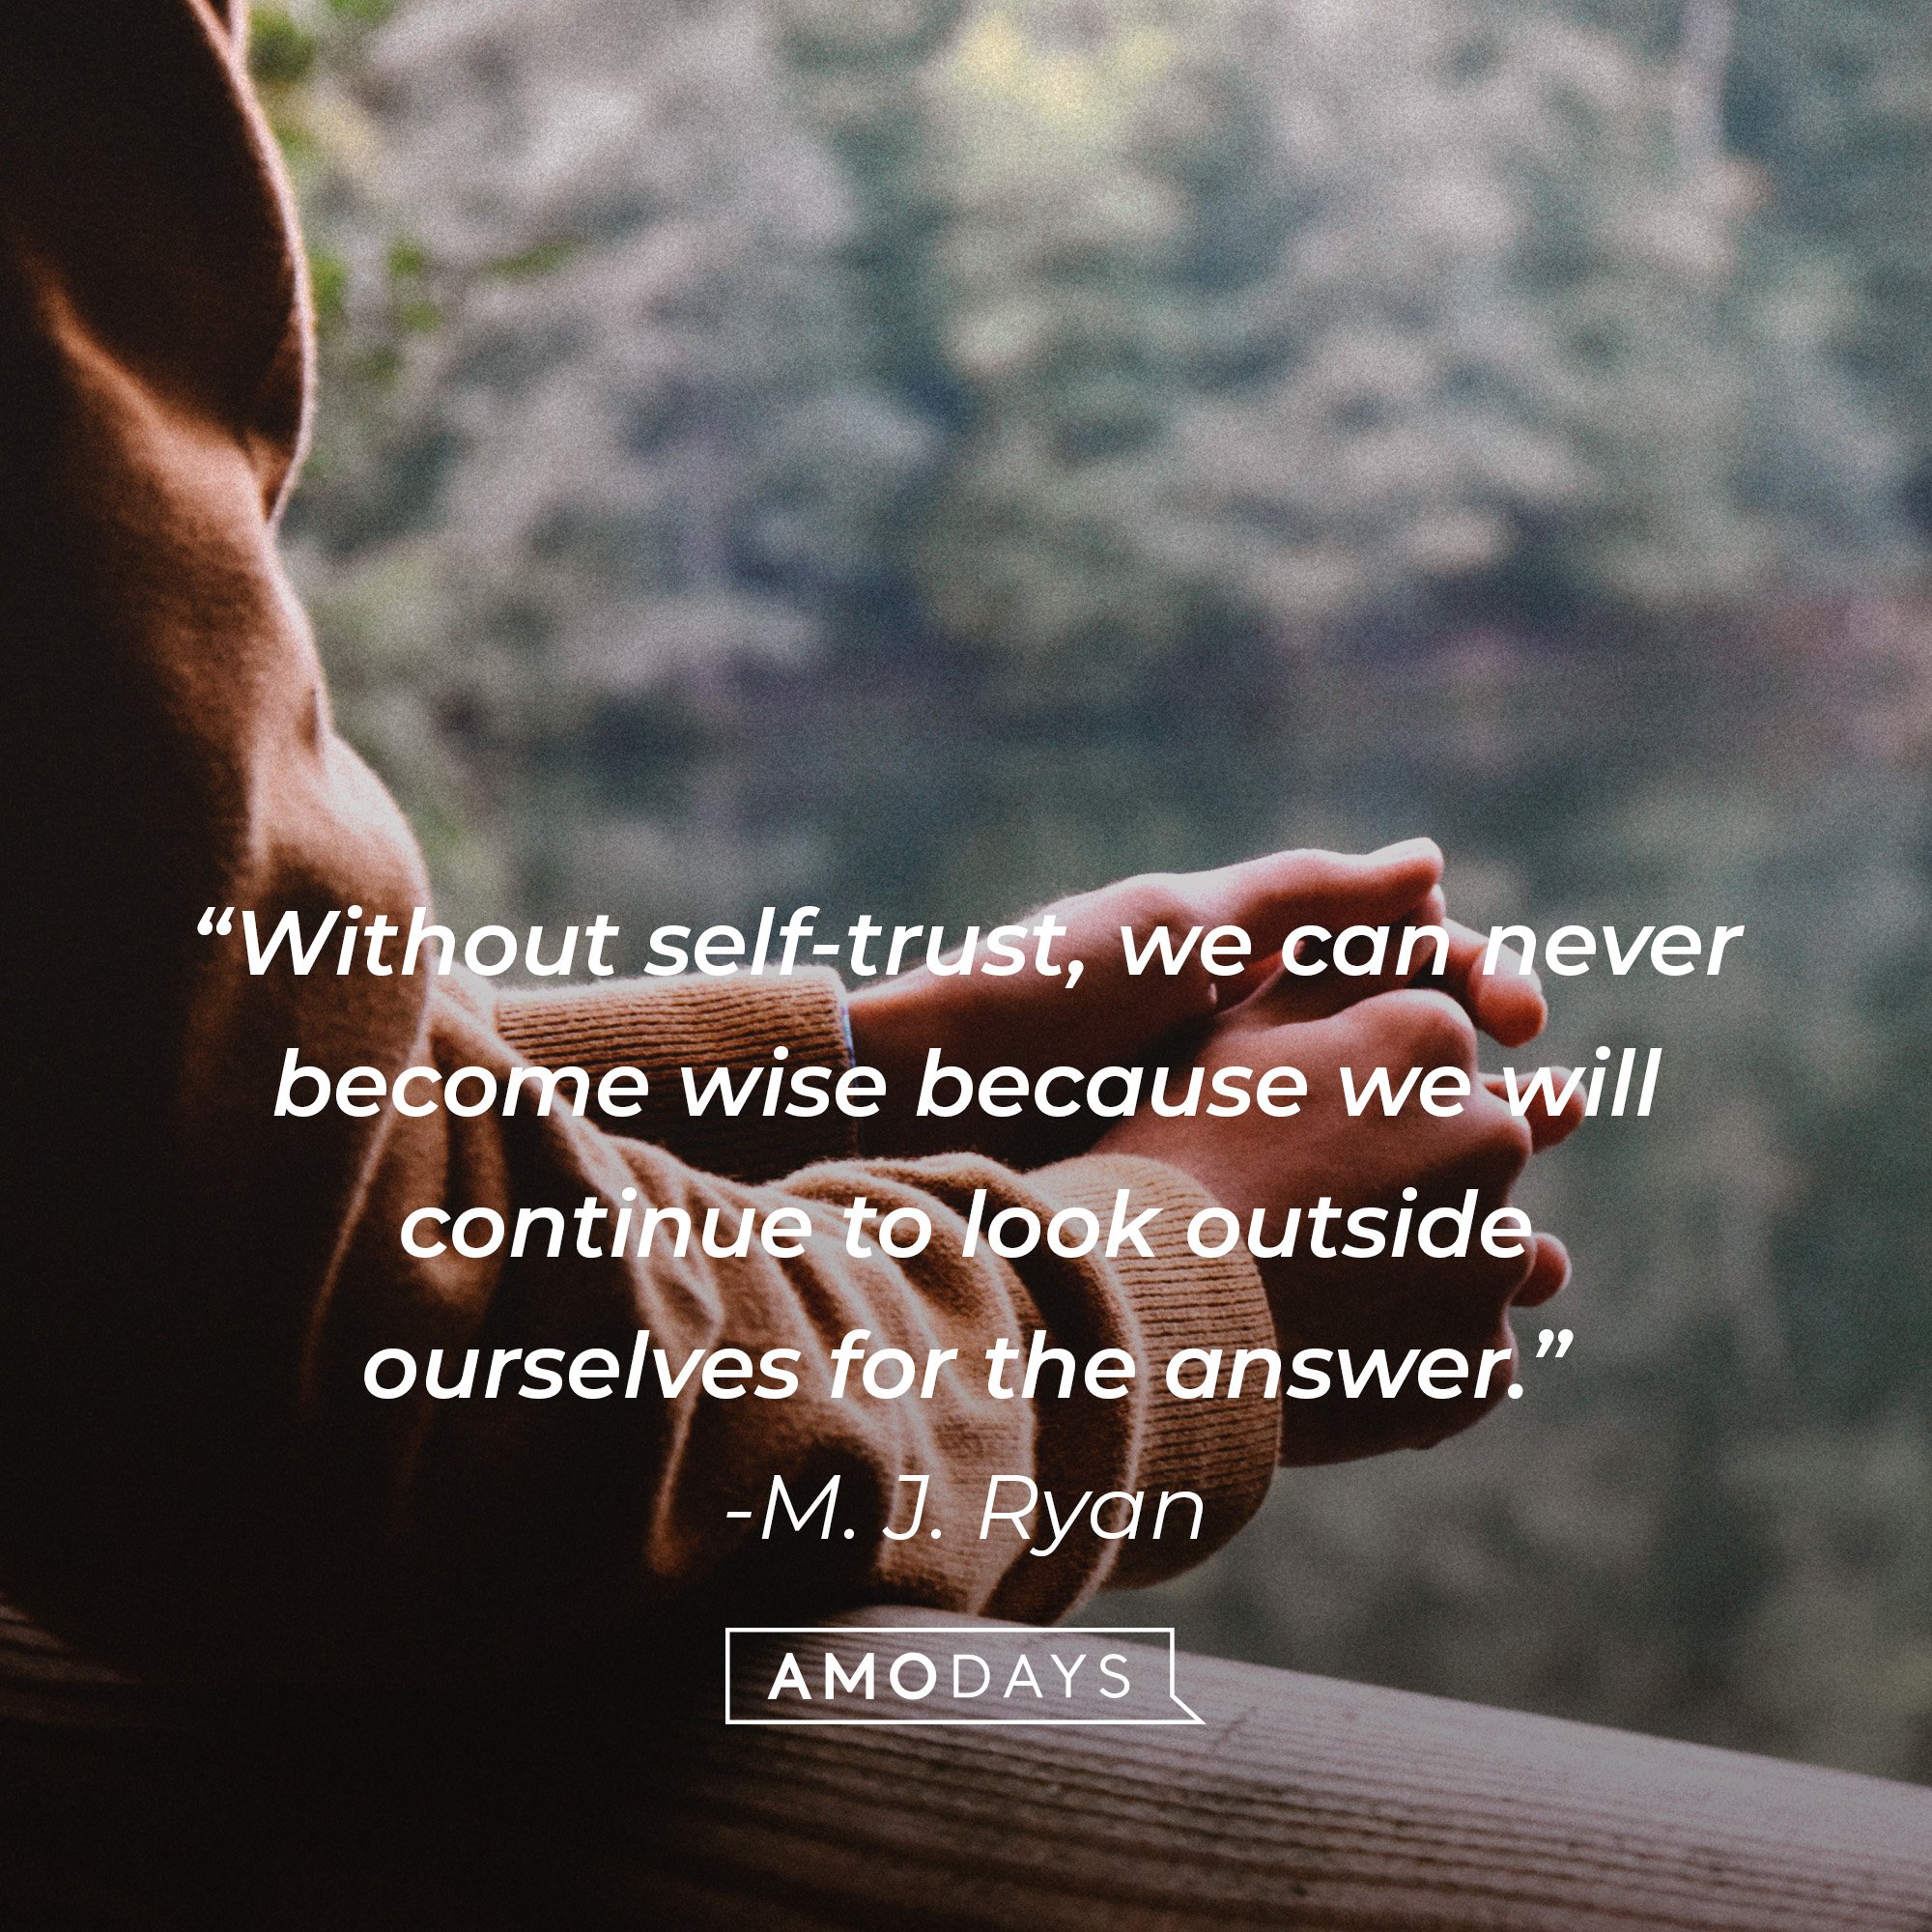 M. J. Ryan’s quote: “Without self-trust, we can never become wise because we will continue to look outside ourselves for the answer.” | Image: AmoDays